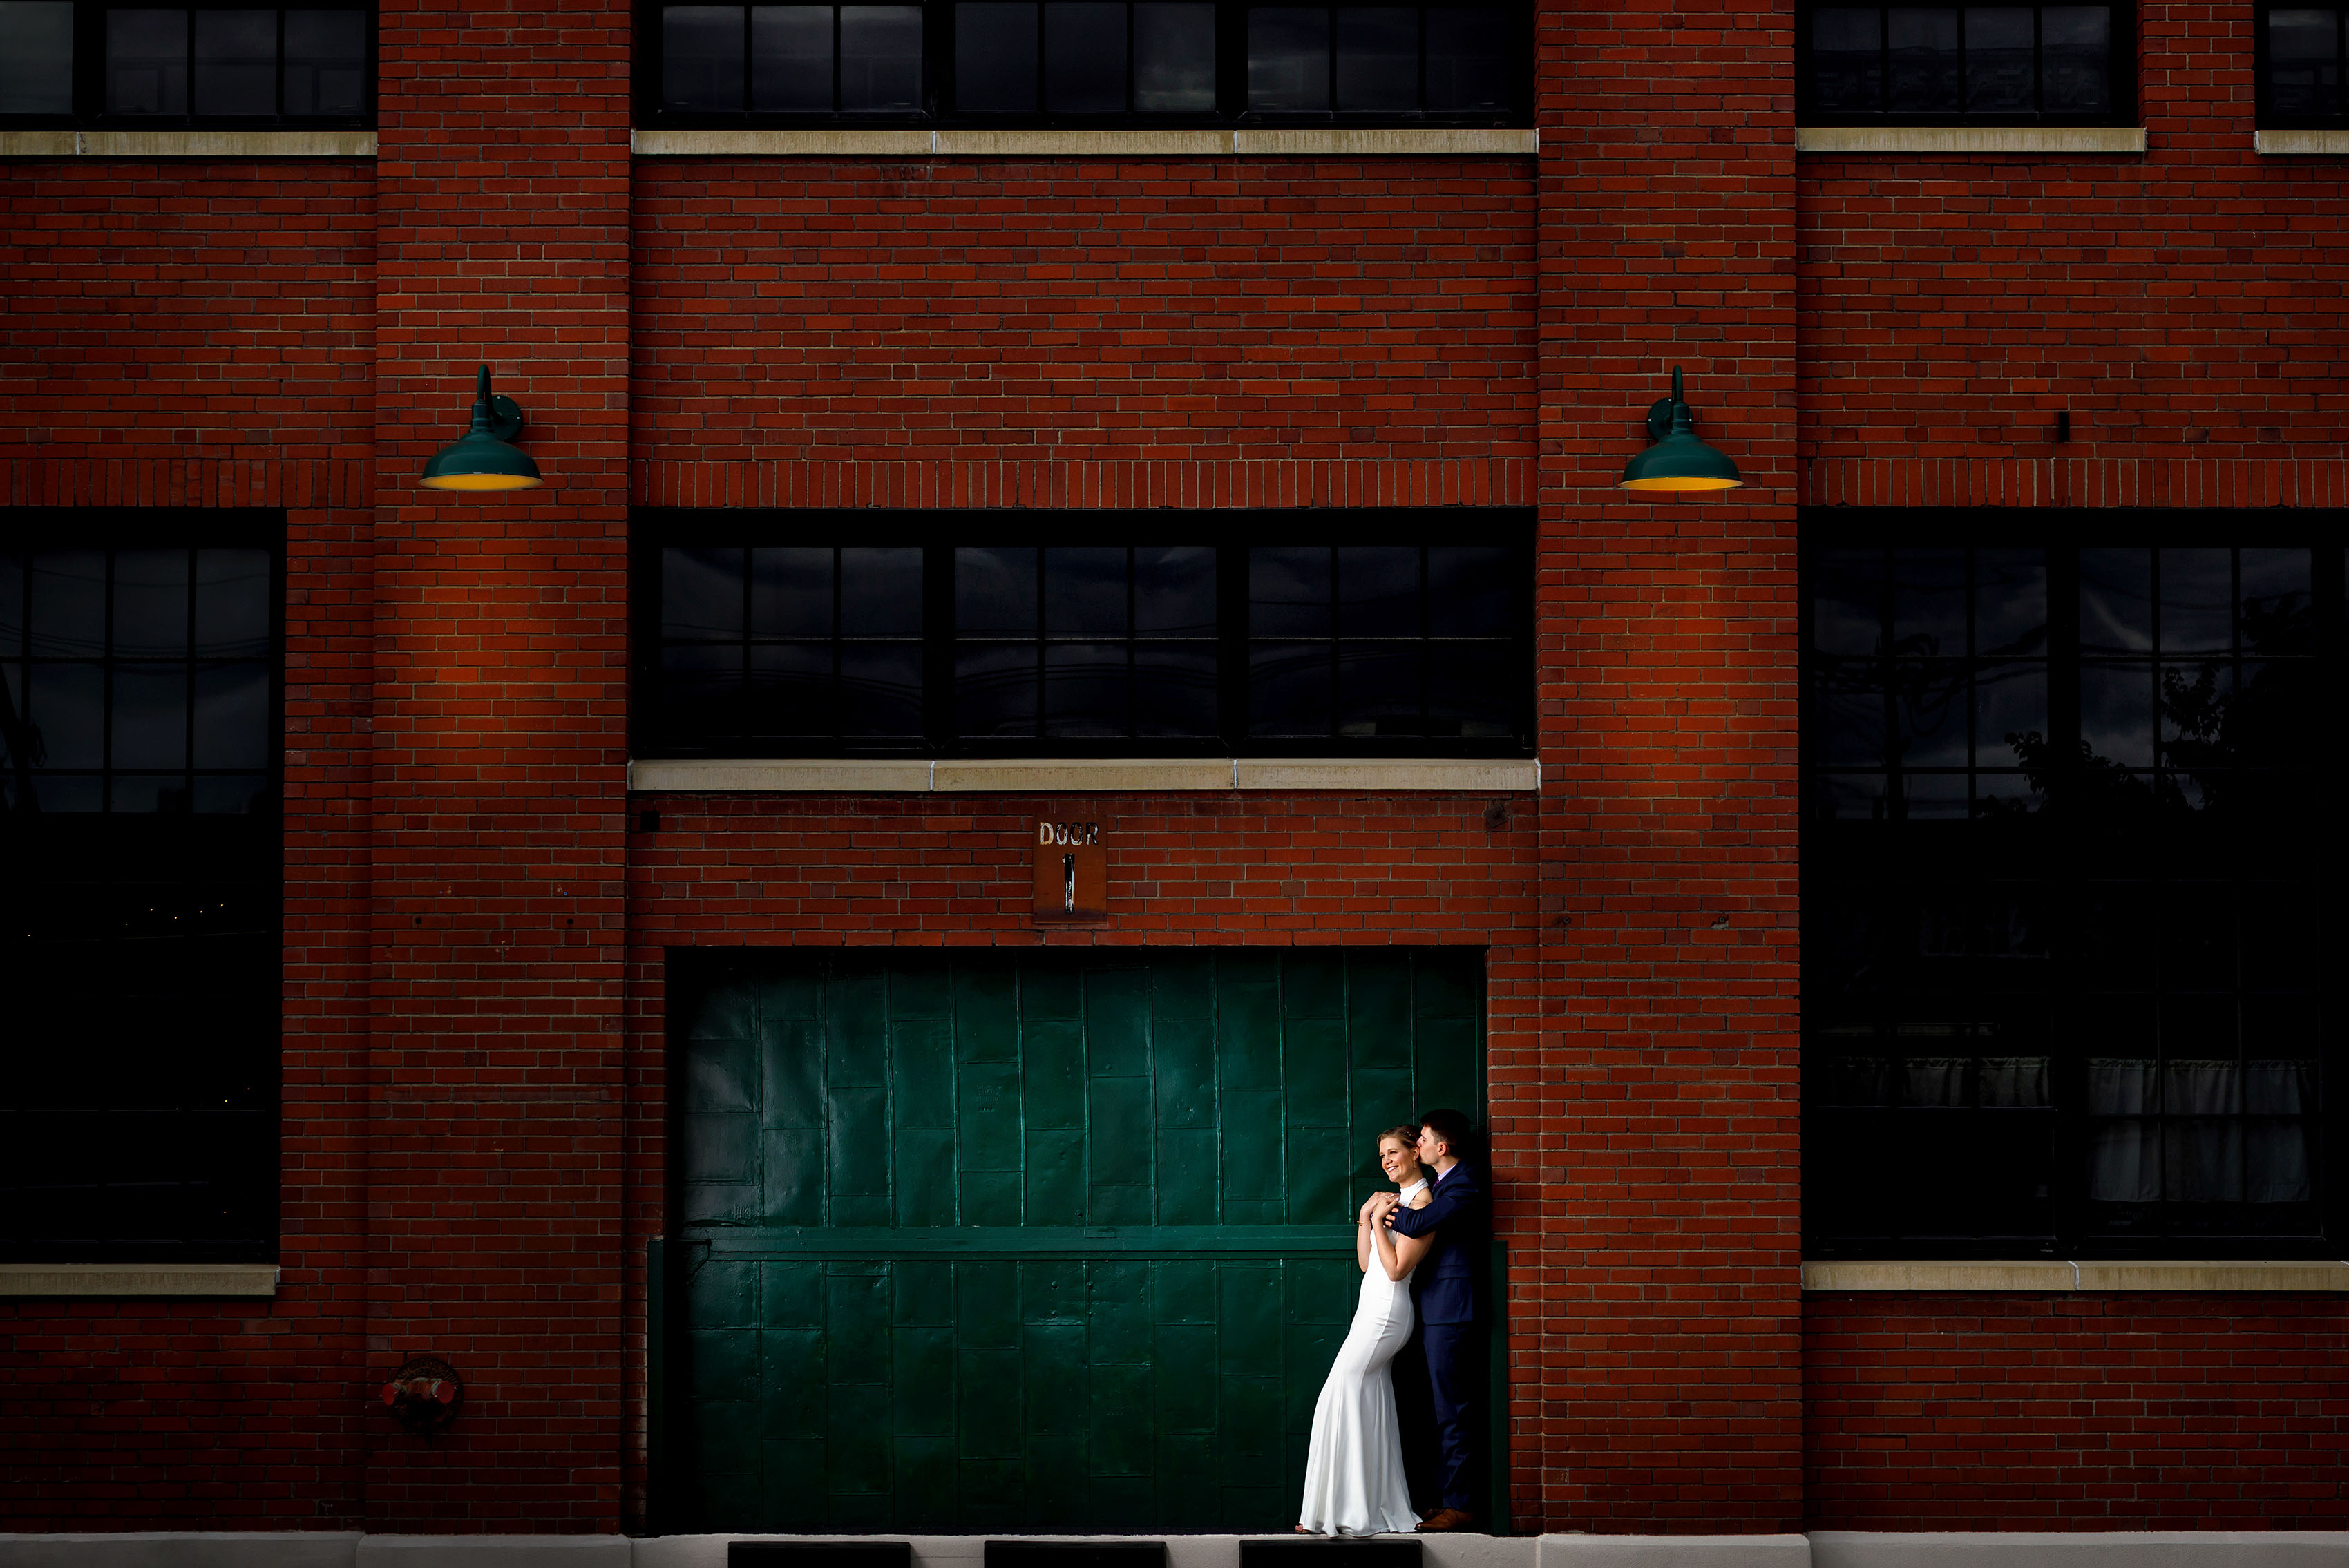 Bride and groom pose for a portrait in an industrial setting